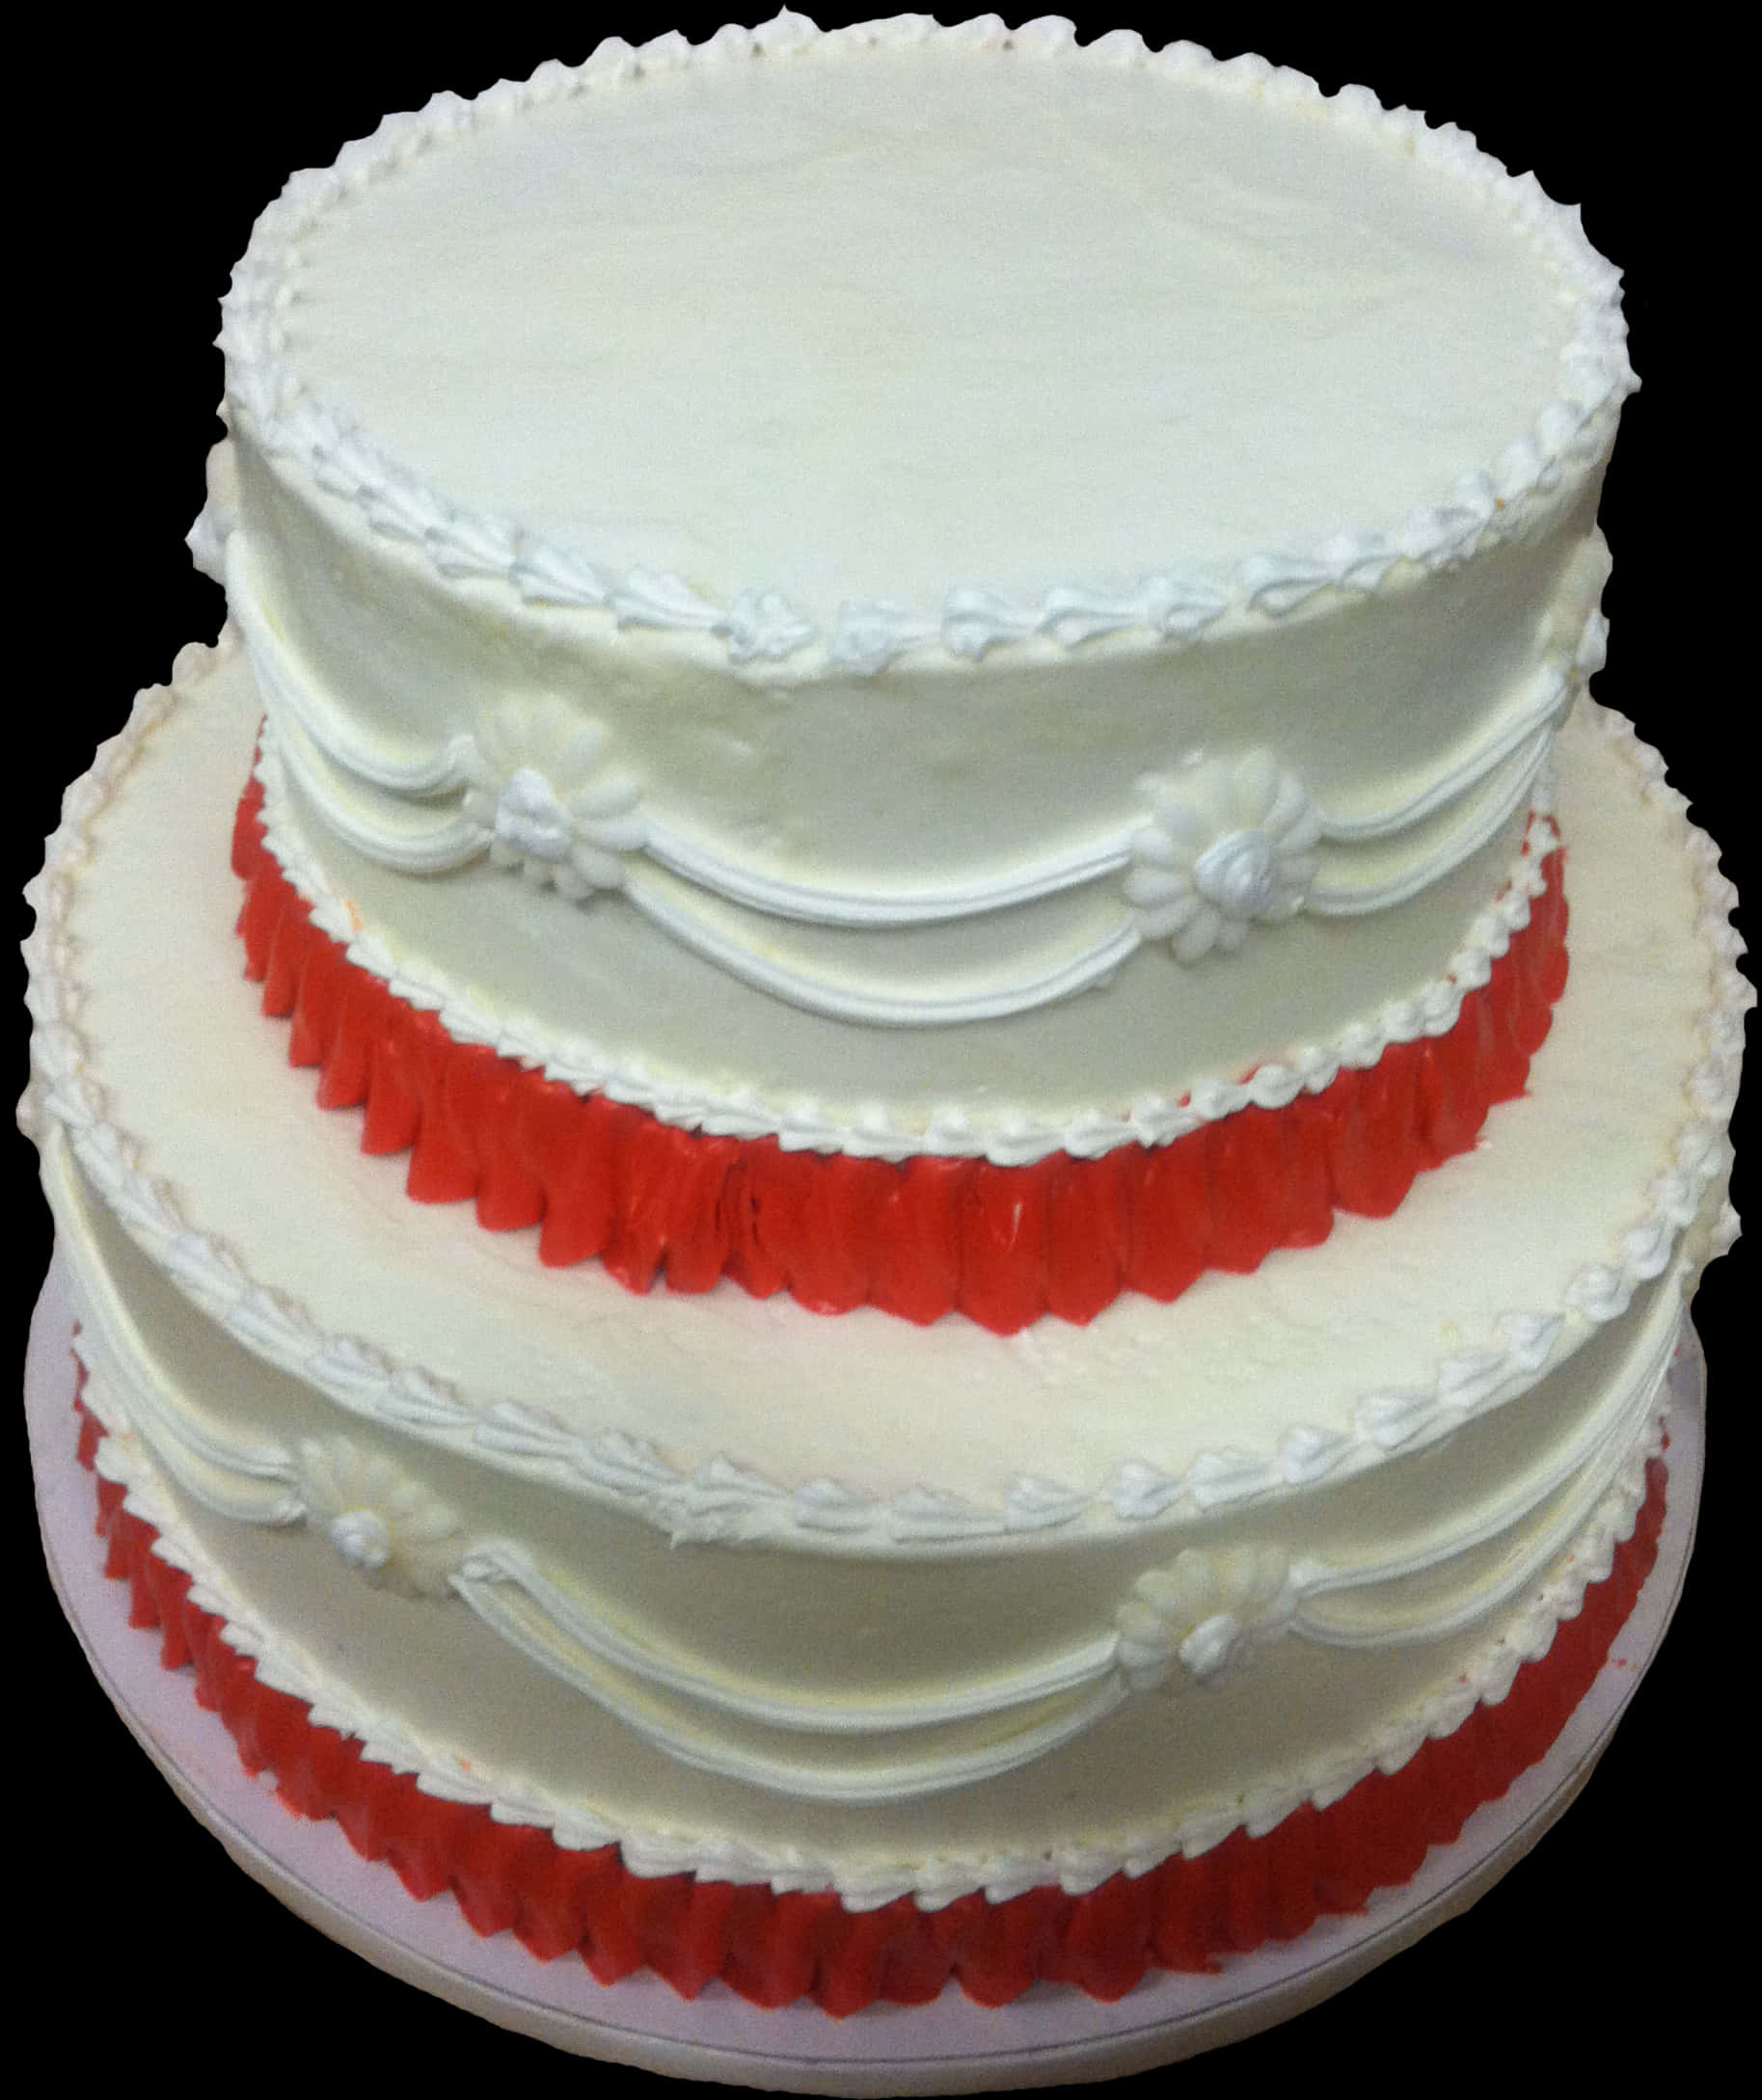 Three Tier Redand White Decorated Cake PNG